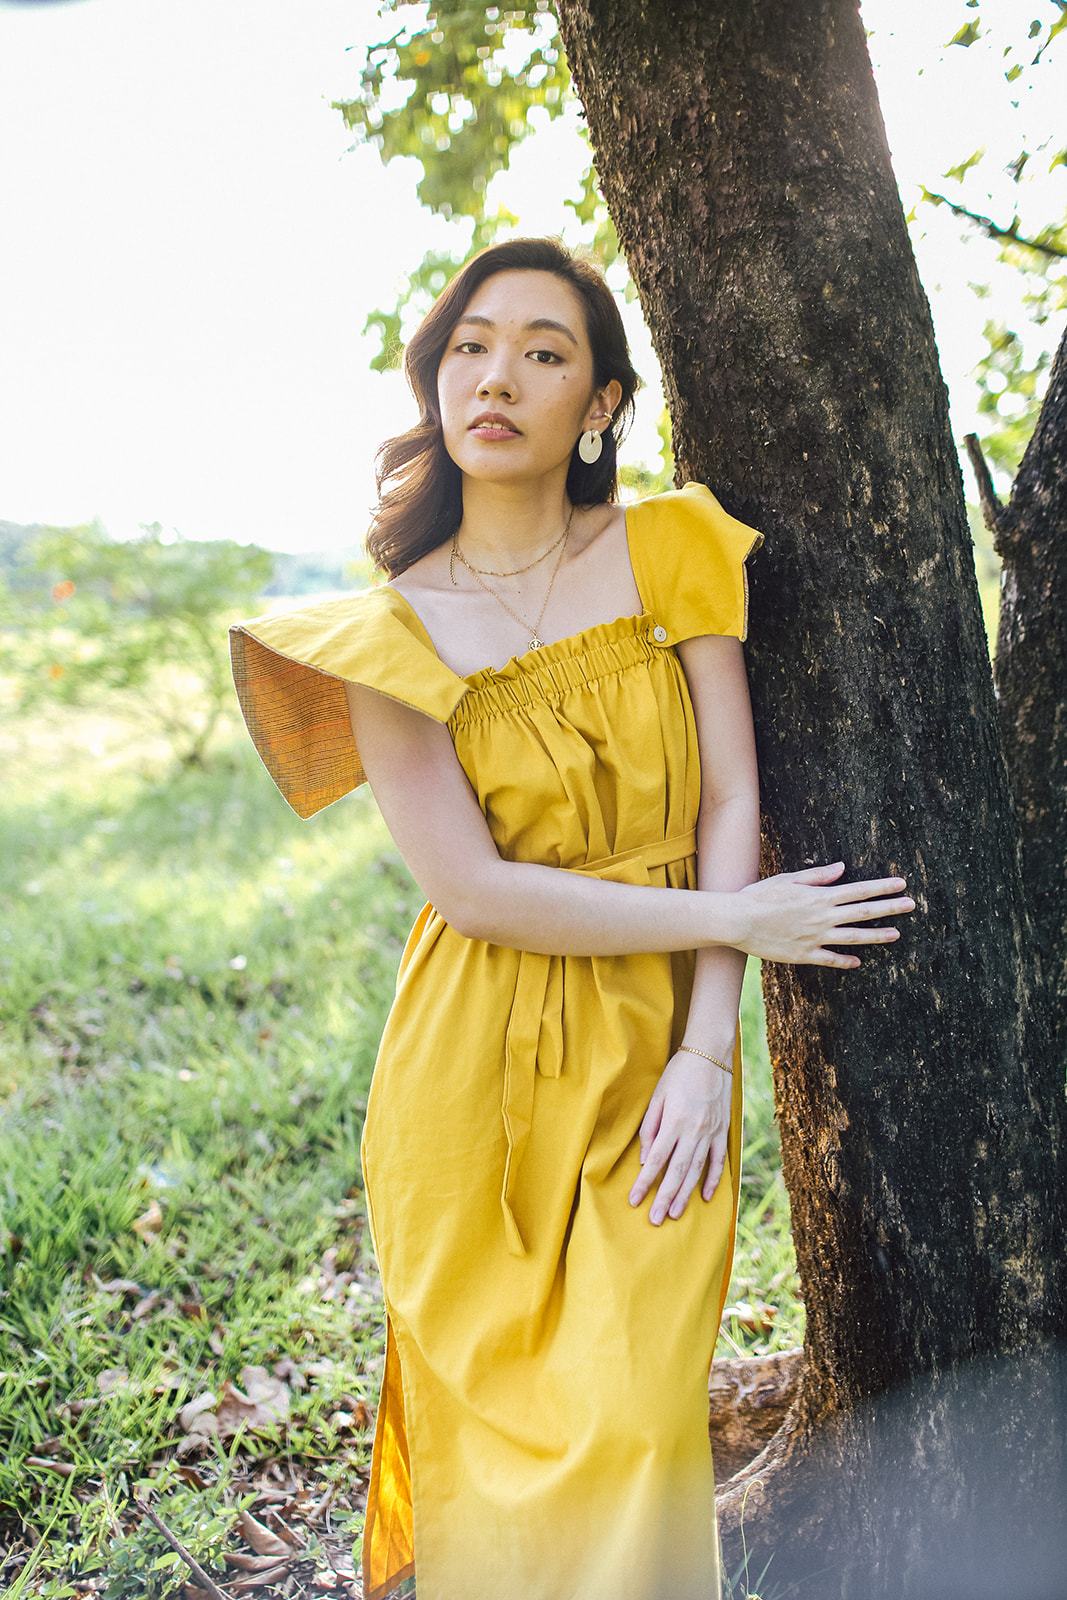 Bell On Off-shoulder Dress Yellow Fashion Rags2Riches